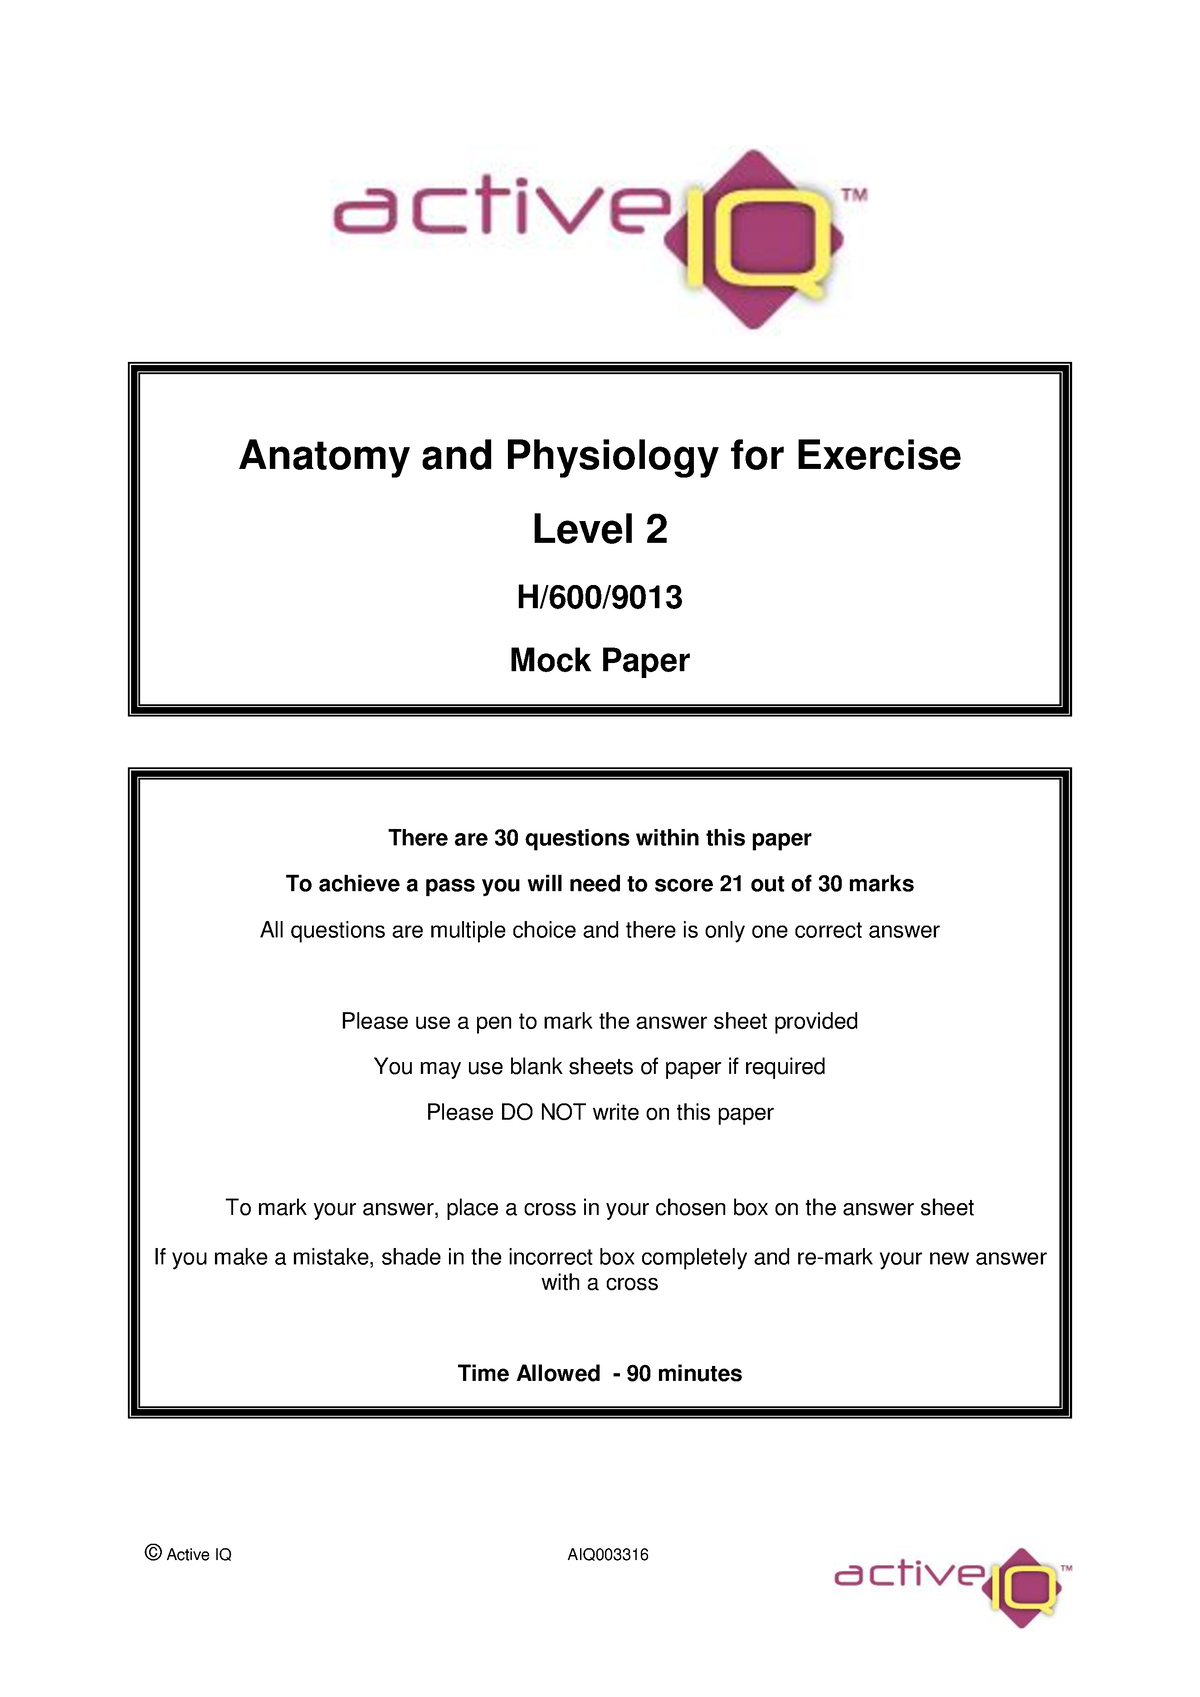 Unit 1 Ap For Exercise L2 Mock Paper Anatomy And Physiology For